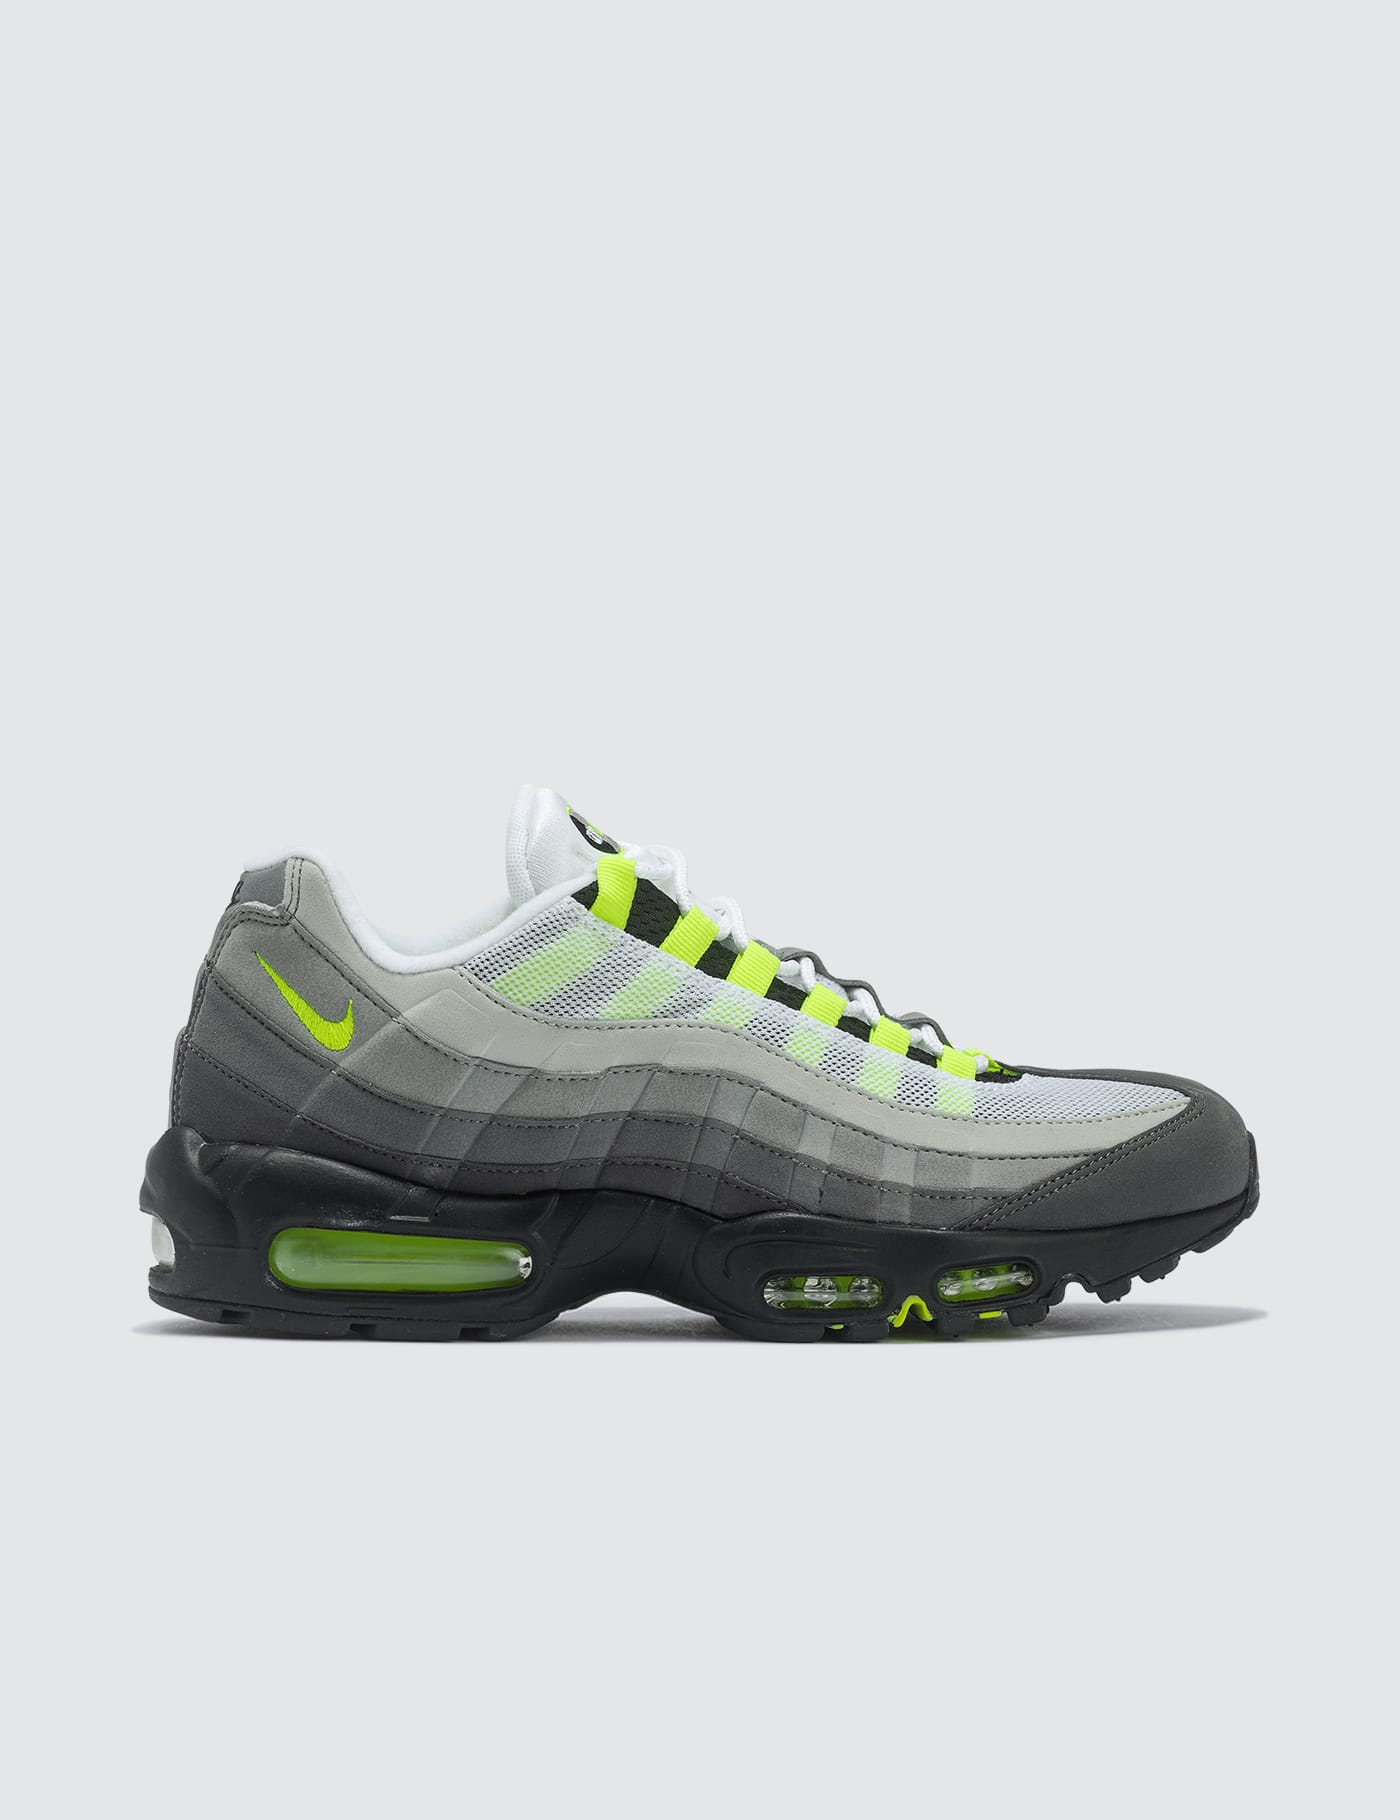 Nike - Air Max 95 Og Neon (2015) | HBX - Globally Curated Fashion